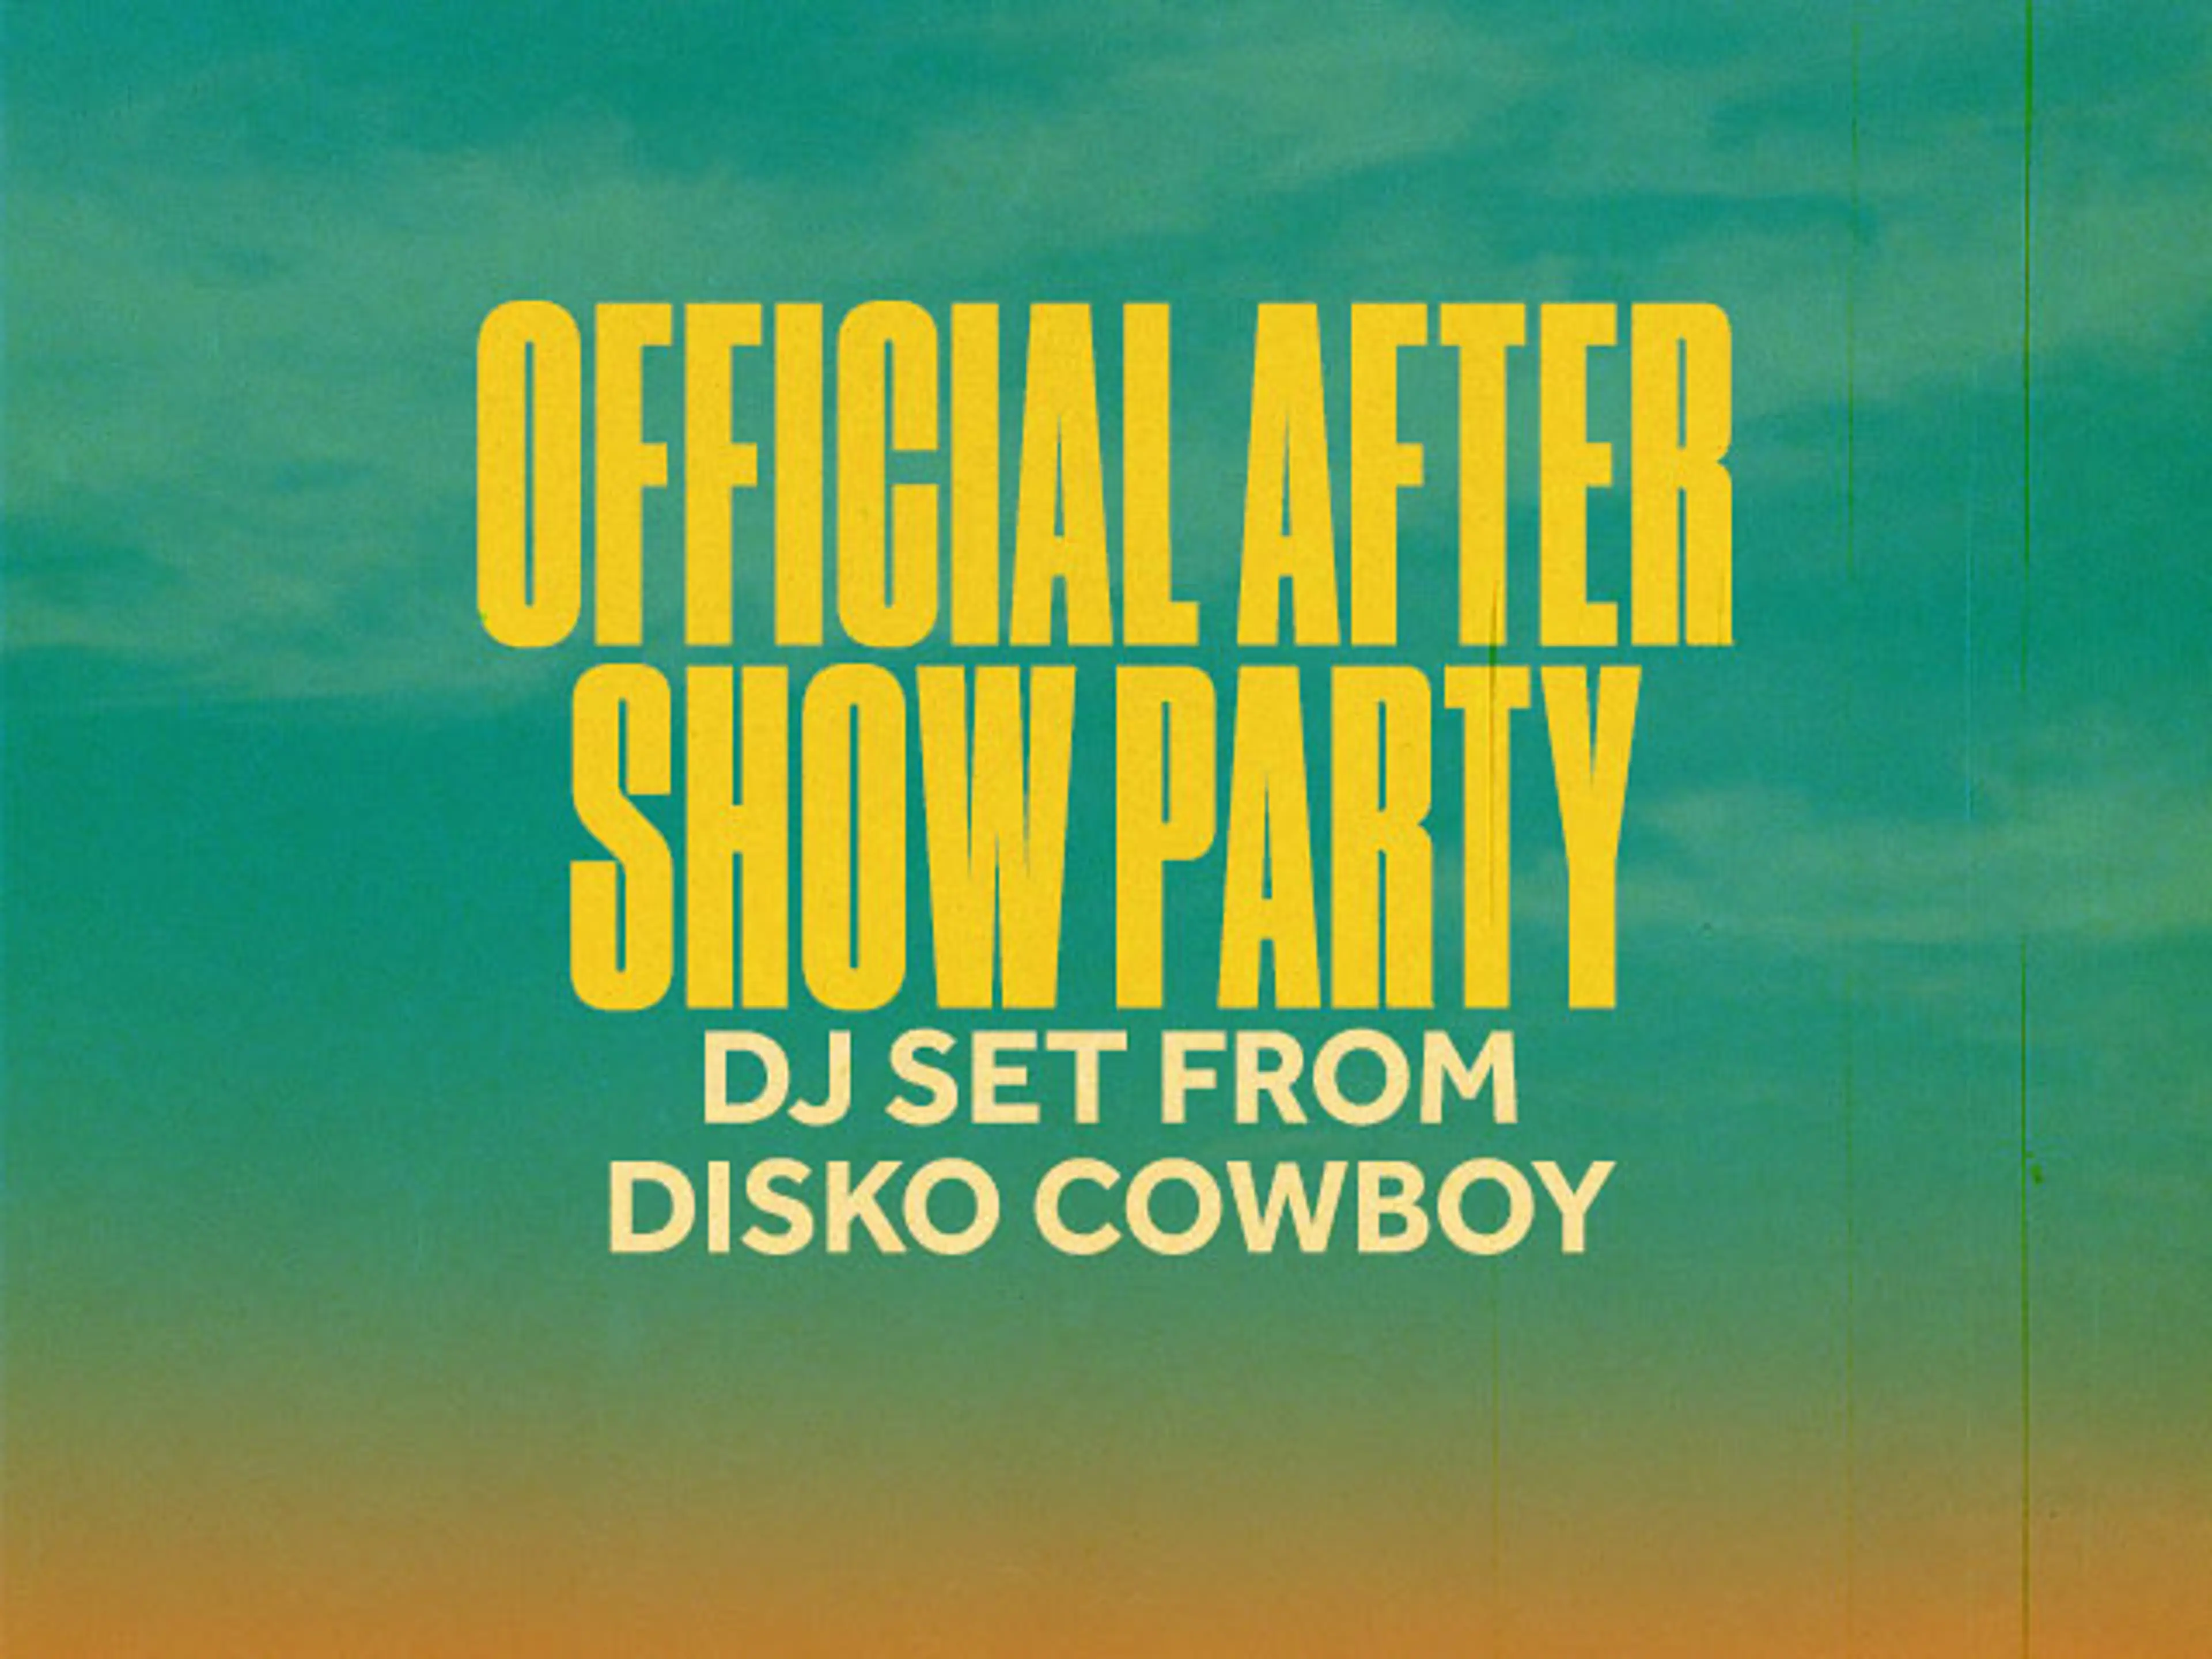 Official After Show Party